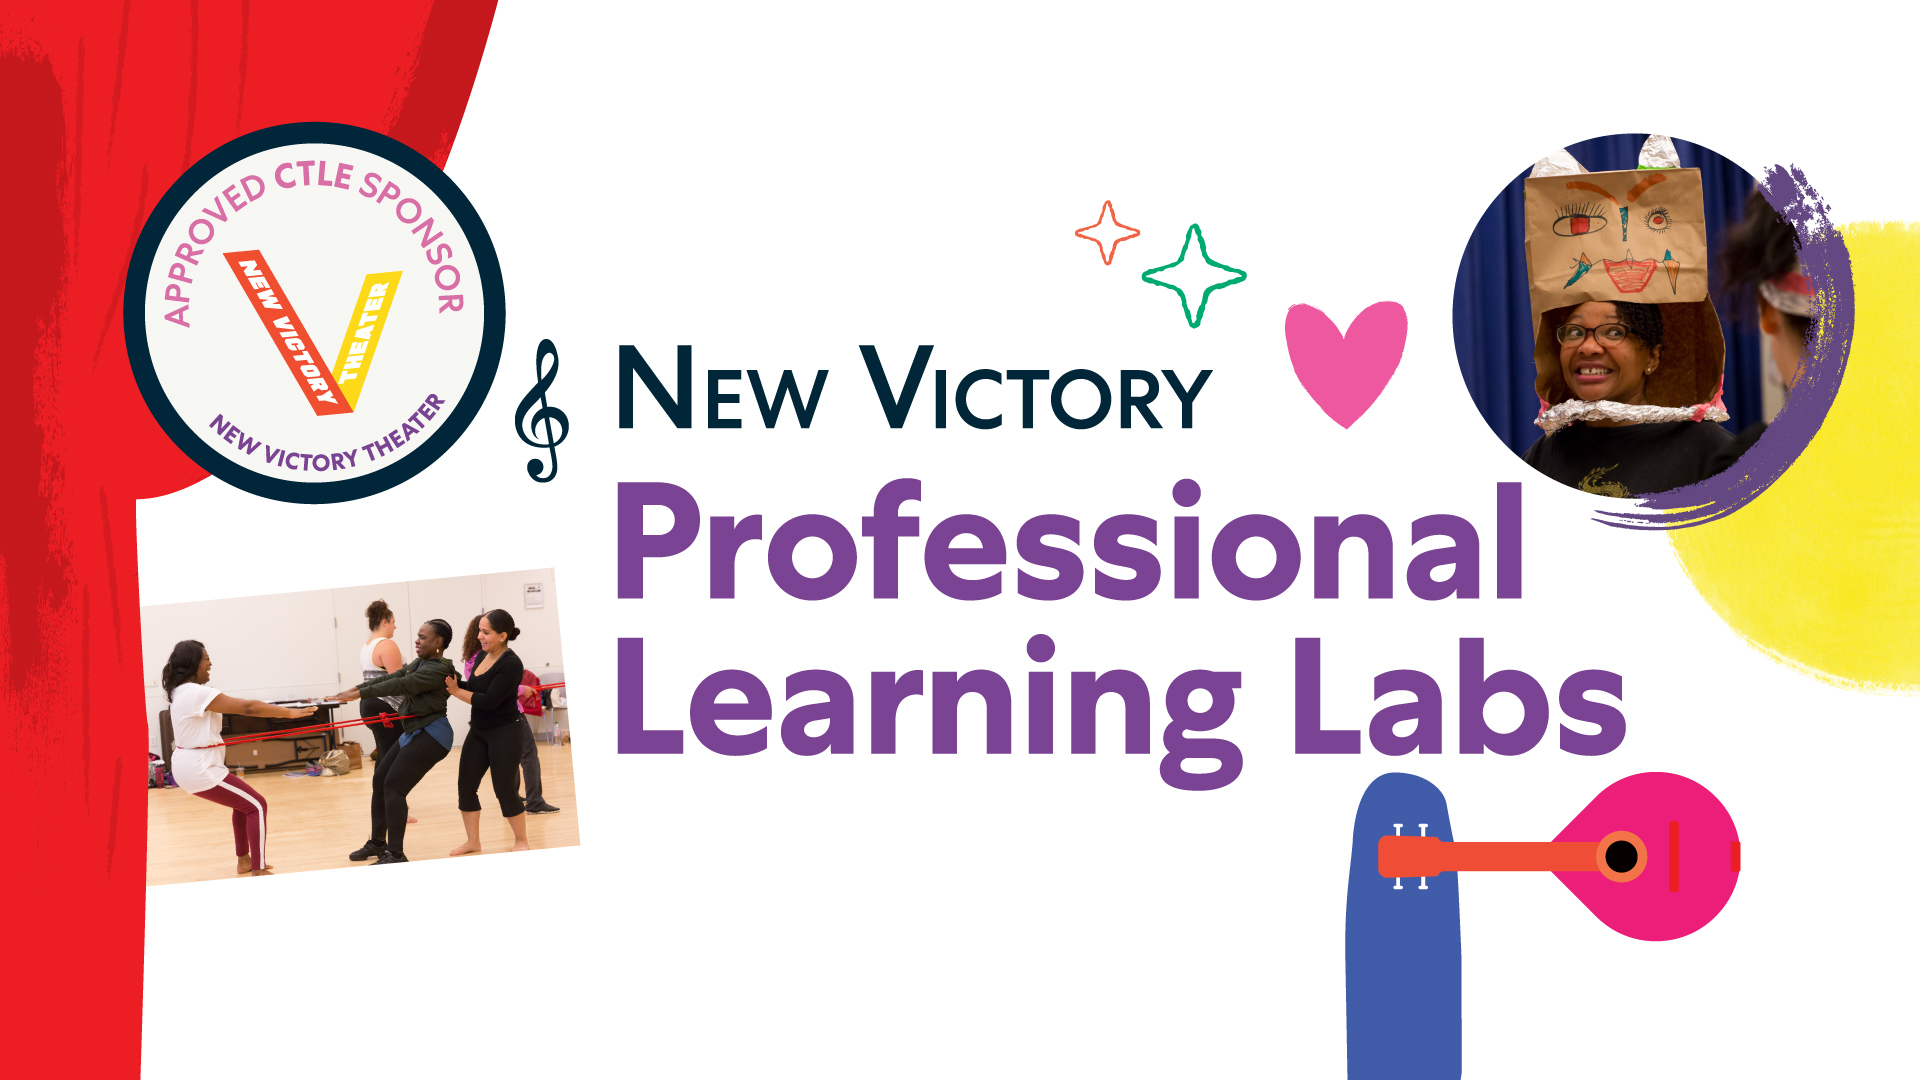 Approved CTLE Sponsor: New Victory Theater. New Victory Professional Learning Labs, with two photos of teachers doing activities in the workshops.